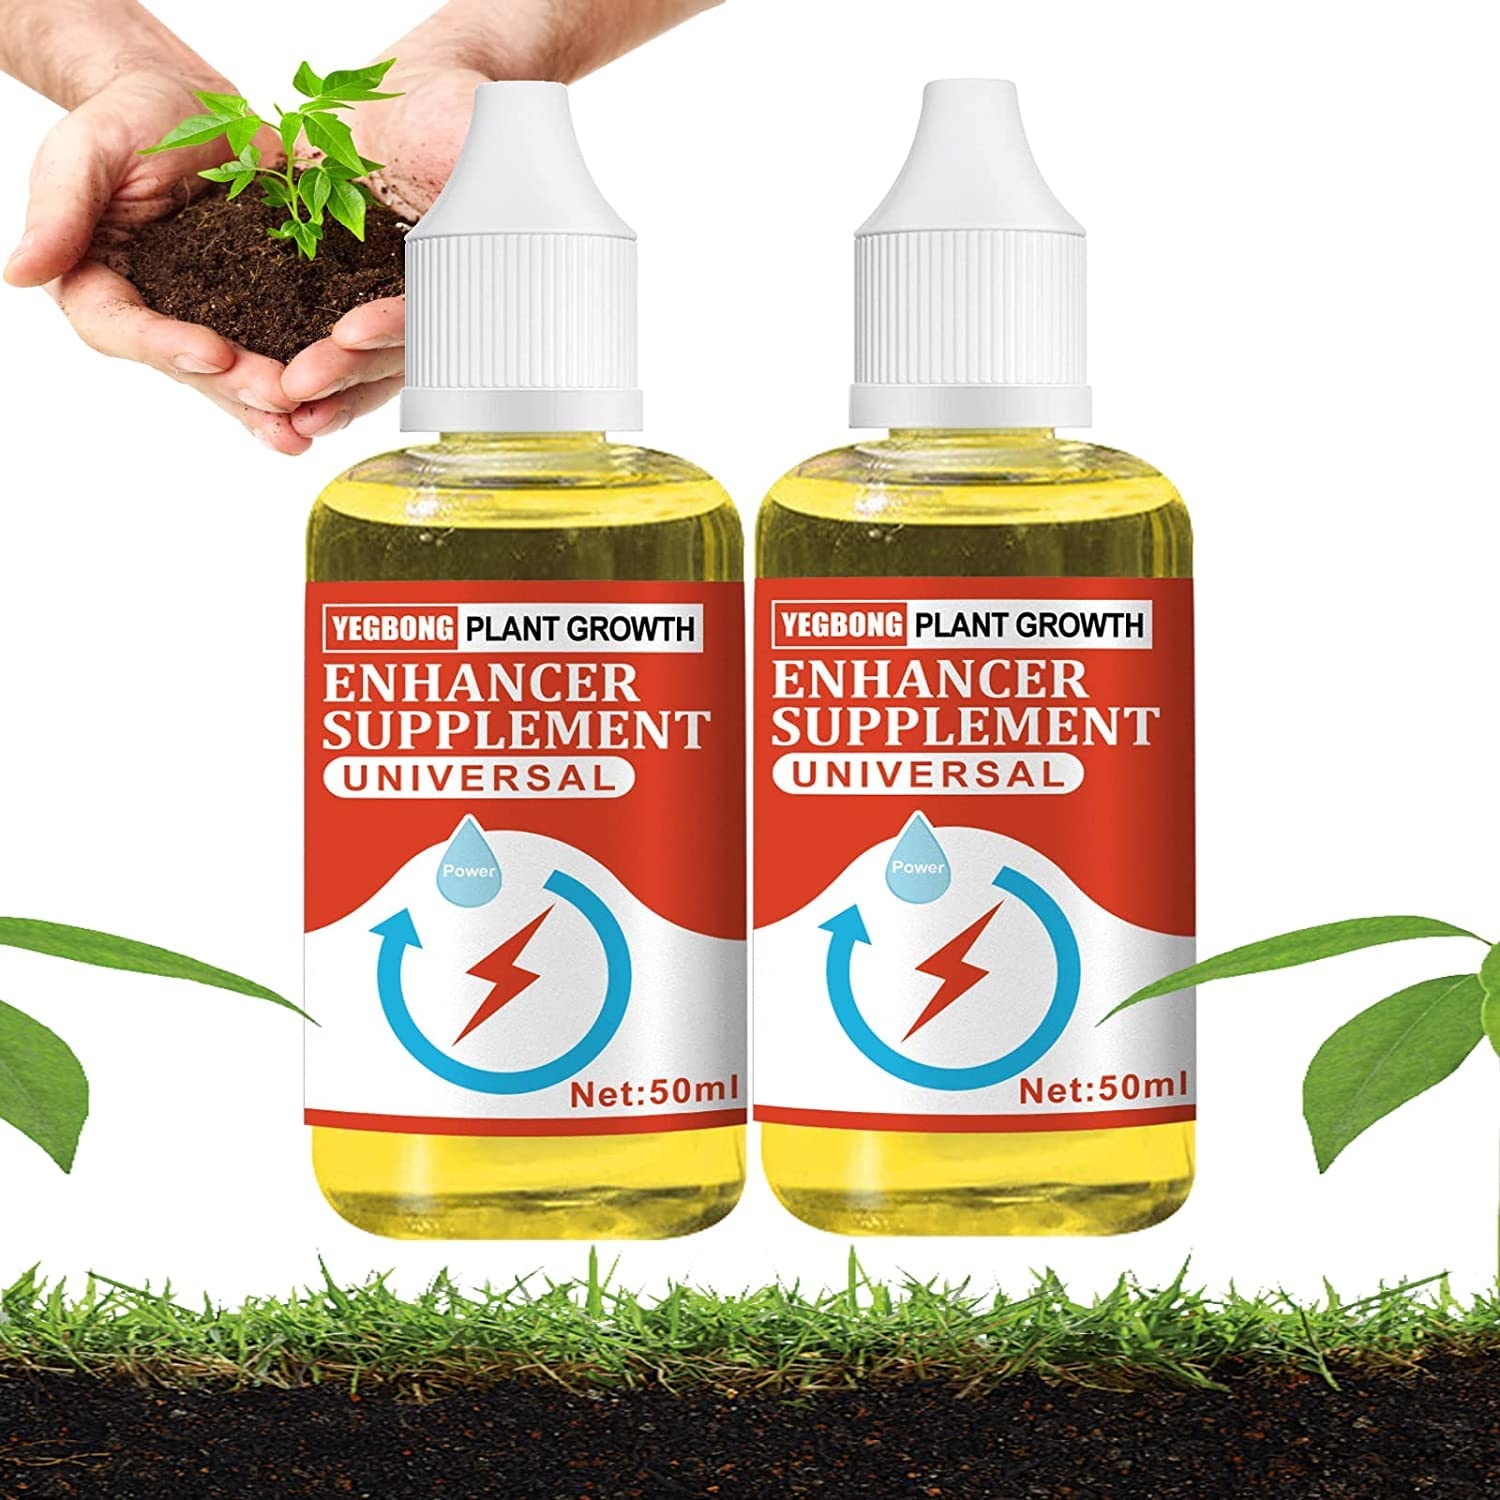 Plant Growth Enhancer Supplement 50ml Take Root Rooting Hormone for Cuttings, Plants Root Growth, Transplant and Rescue The Disease Seedlings, Concentrated Magic Solution Promotes Rooting (2PCS)